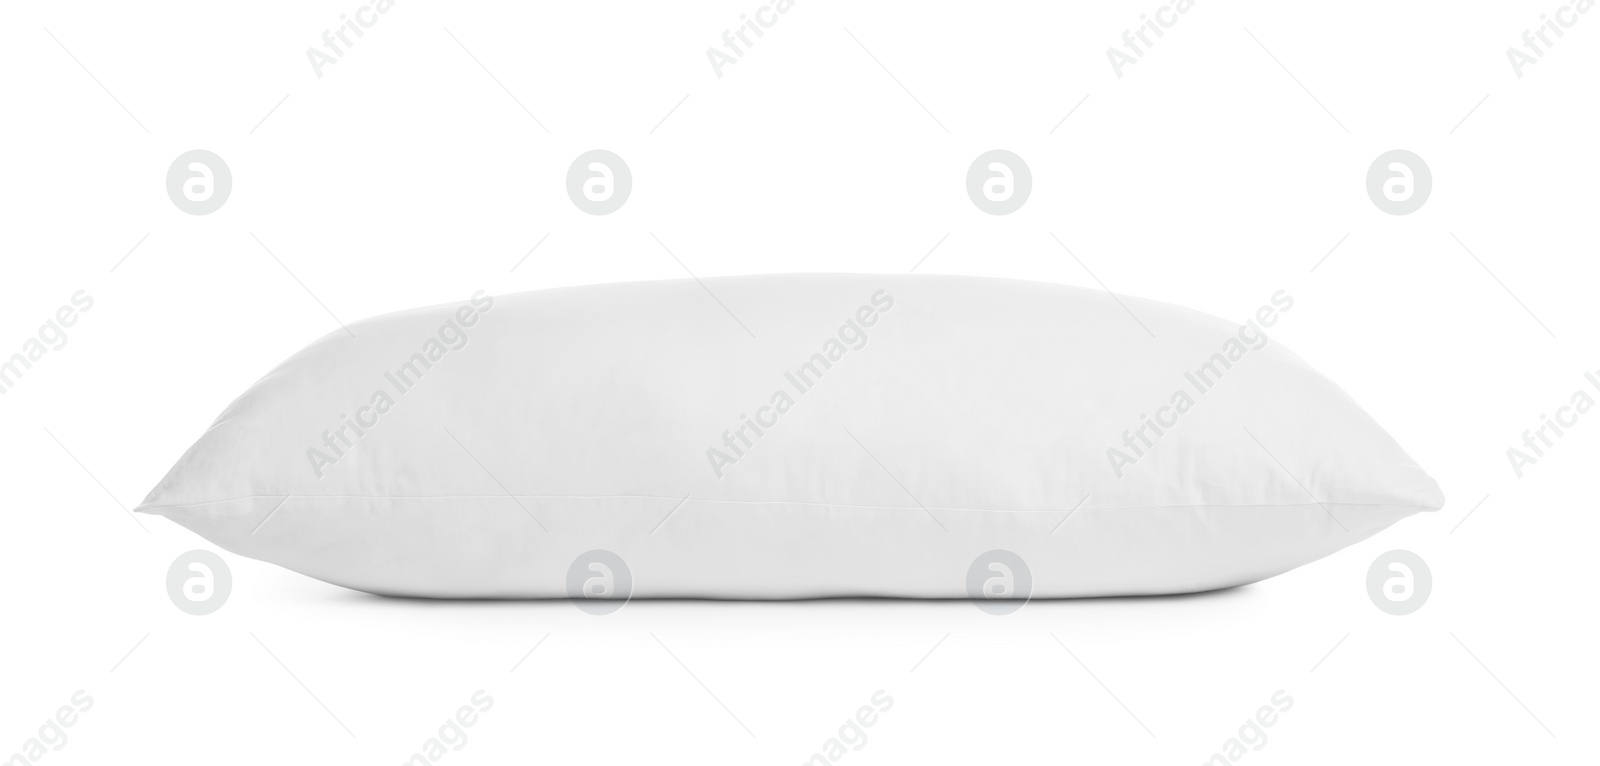 Photo of Blank soft new pillow isolated on white